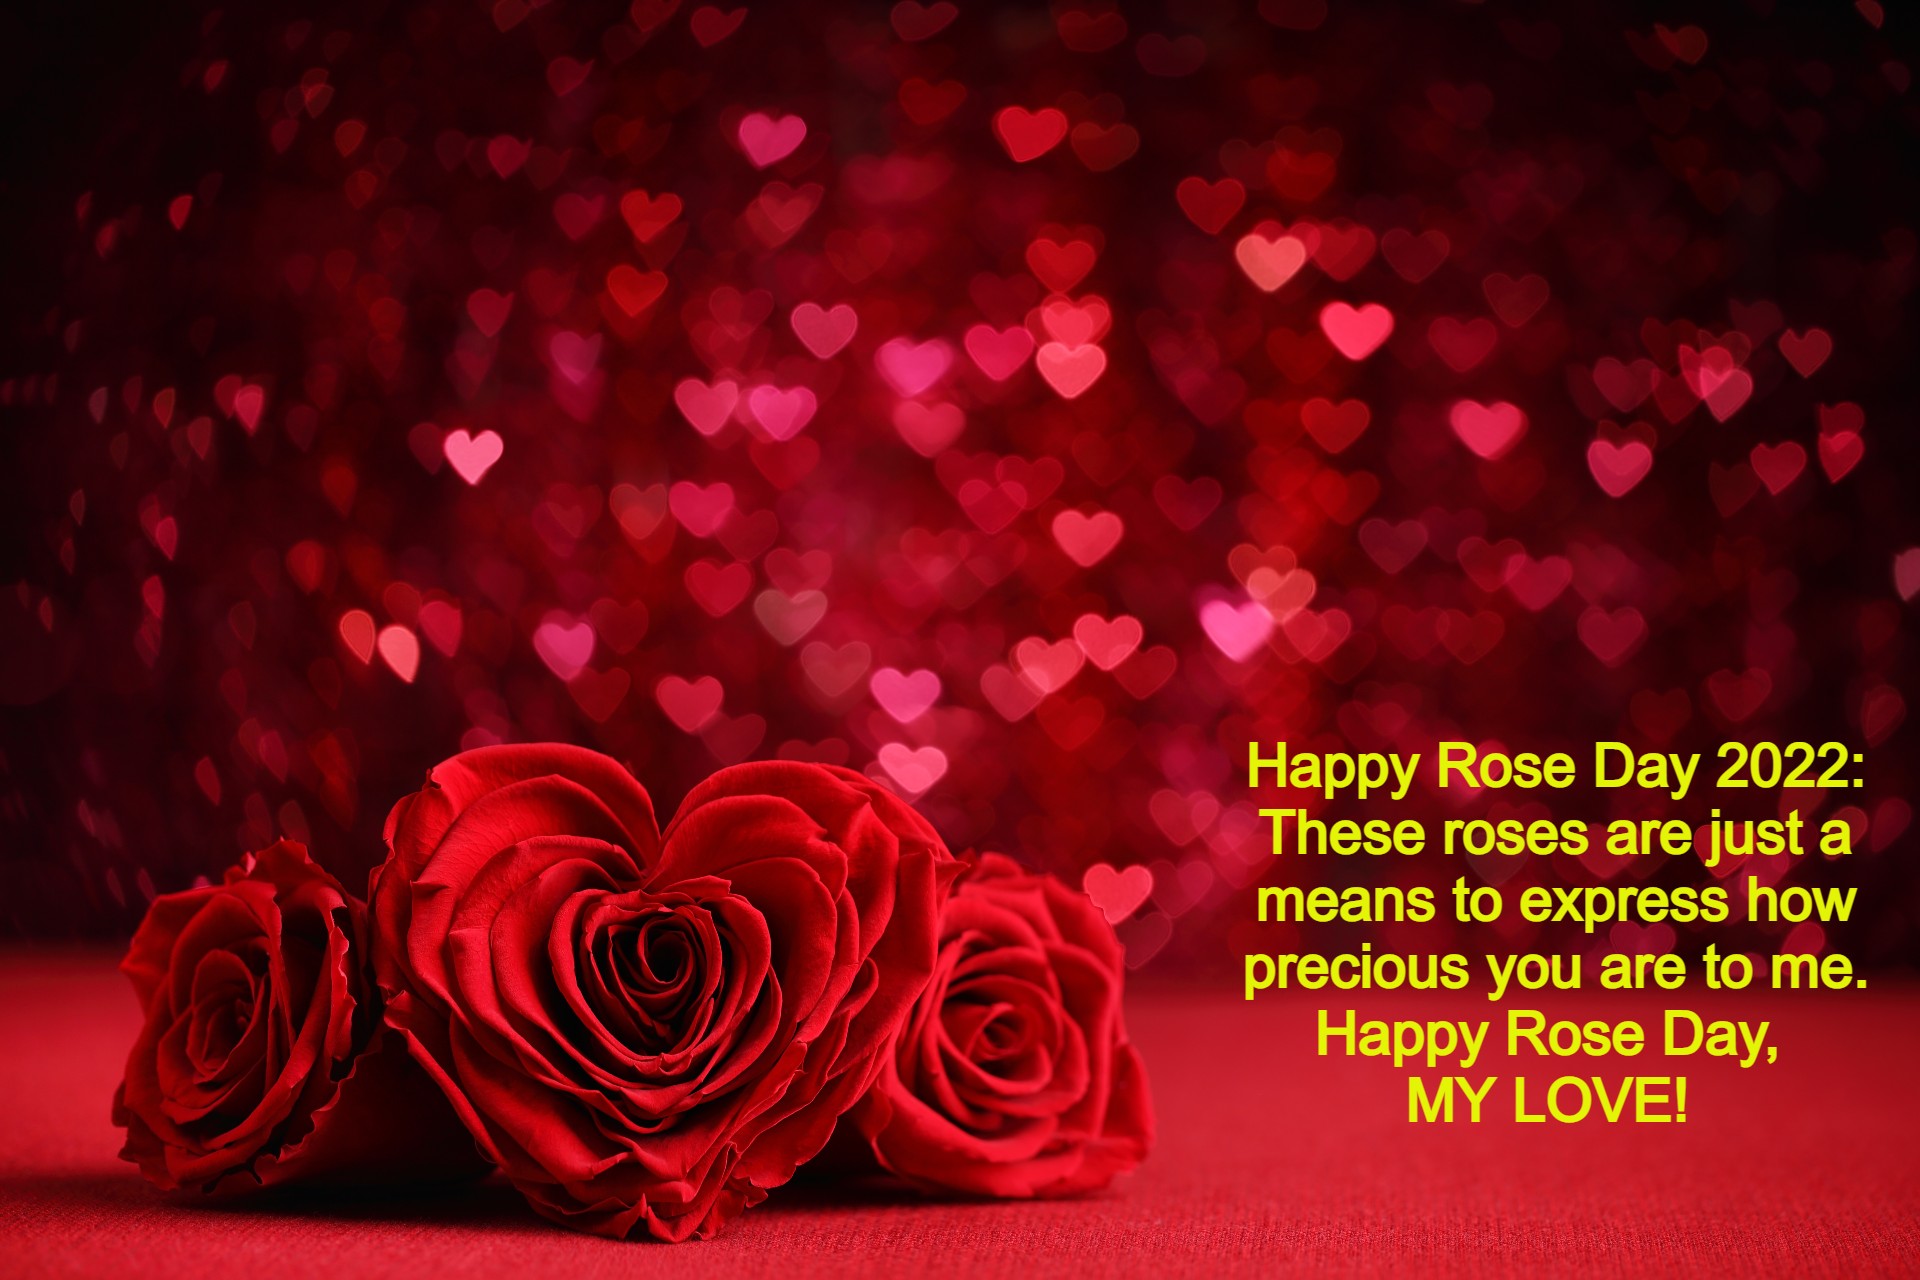 Happy Rose Day 2022: Wishes, Image, Quotes, Messages and WhatsApp Greetings to Share With Your Boyfriend and Girlfriend